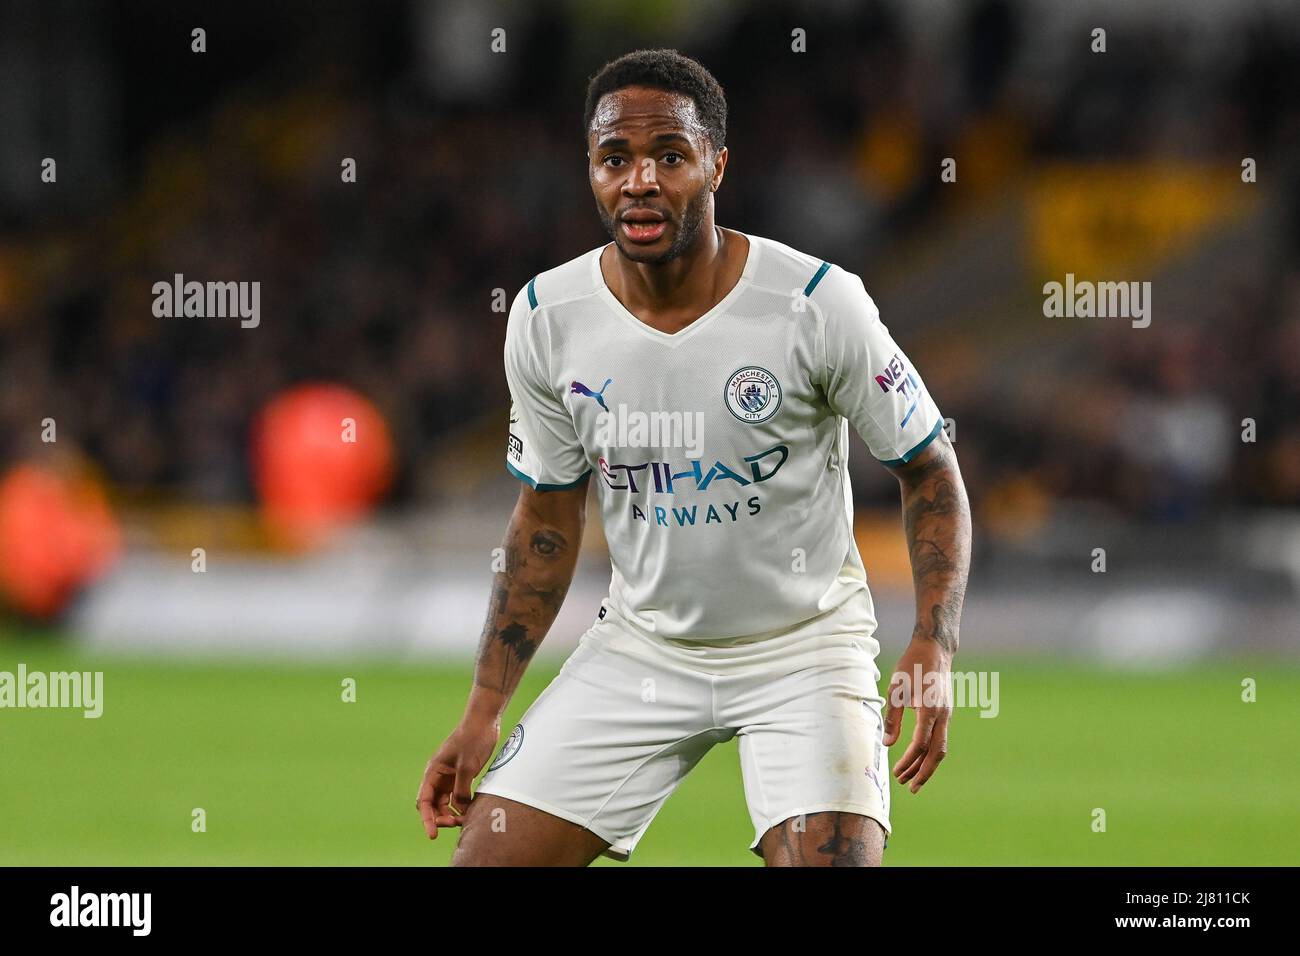 Raheem Sterling #7 of Manchester City during the game Stock Photo